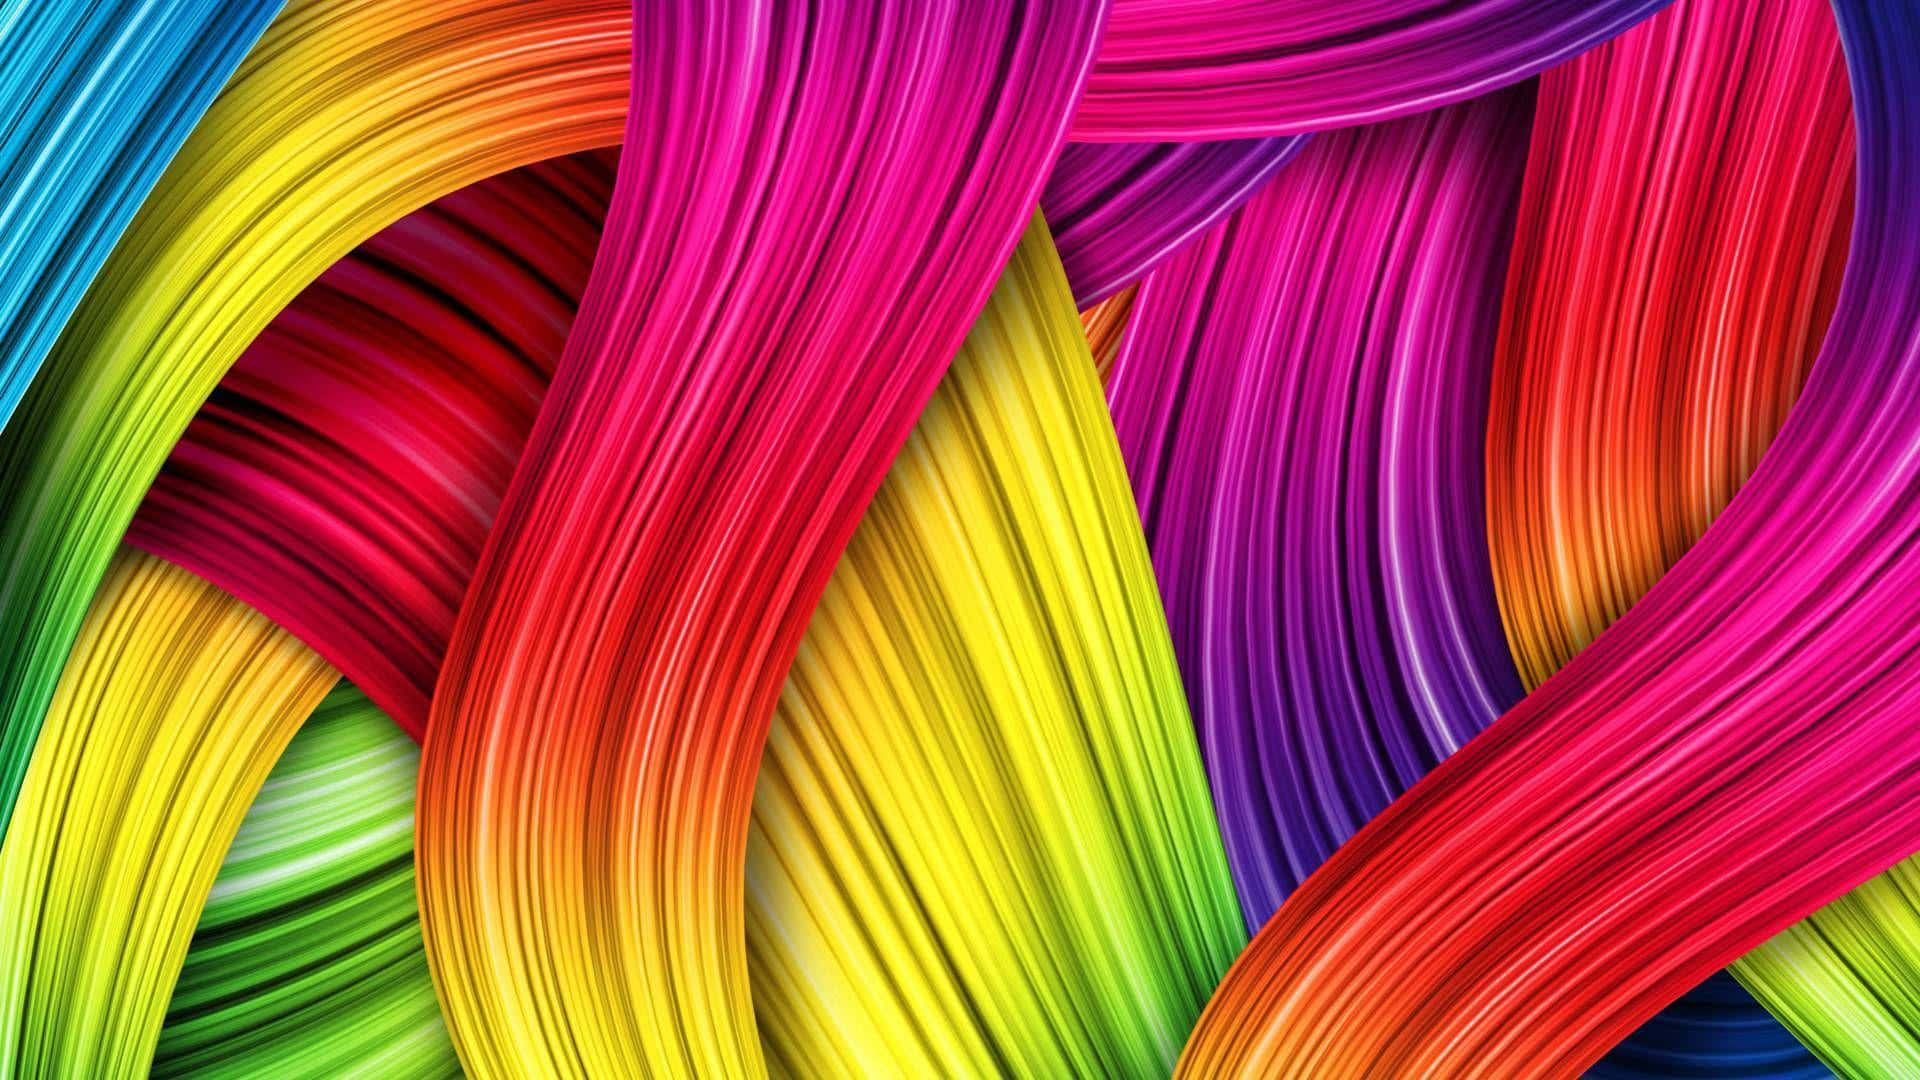 A bright, colorful and vibrant abstract background